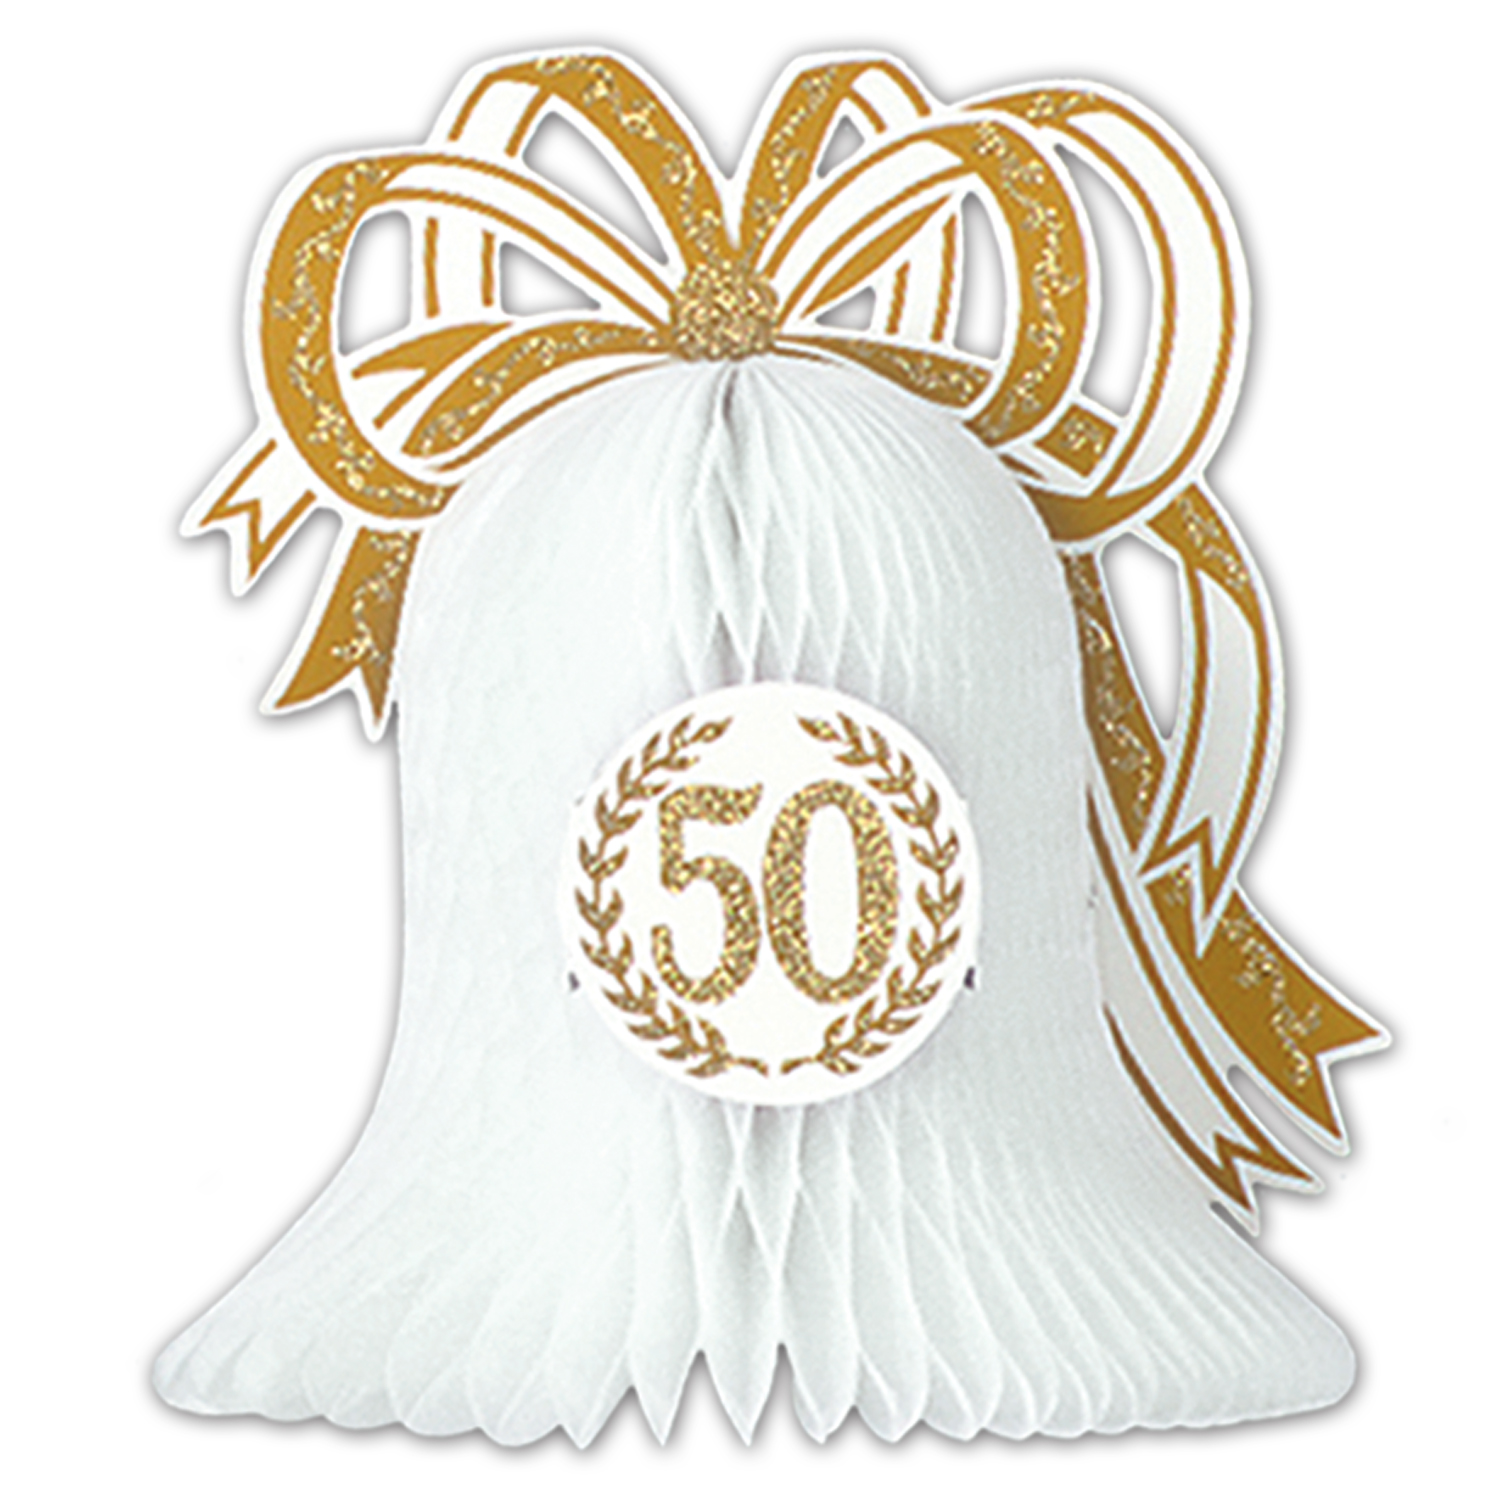 12 Pieces of  50th  Anniversary Centerpiece